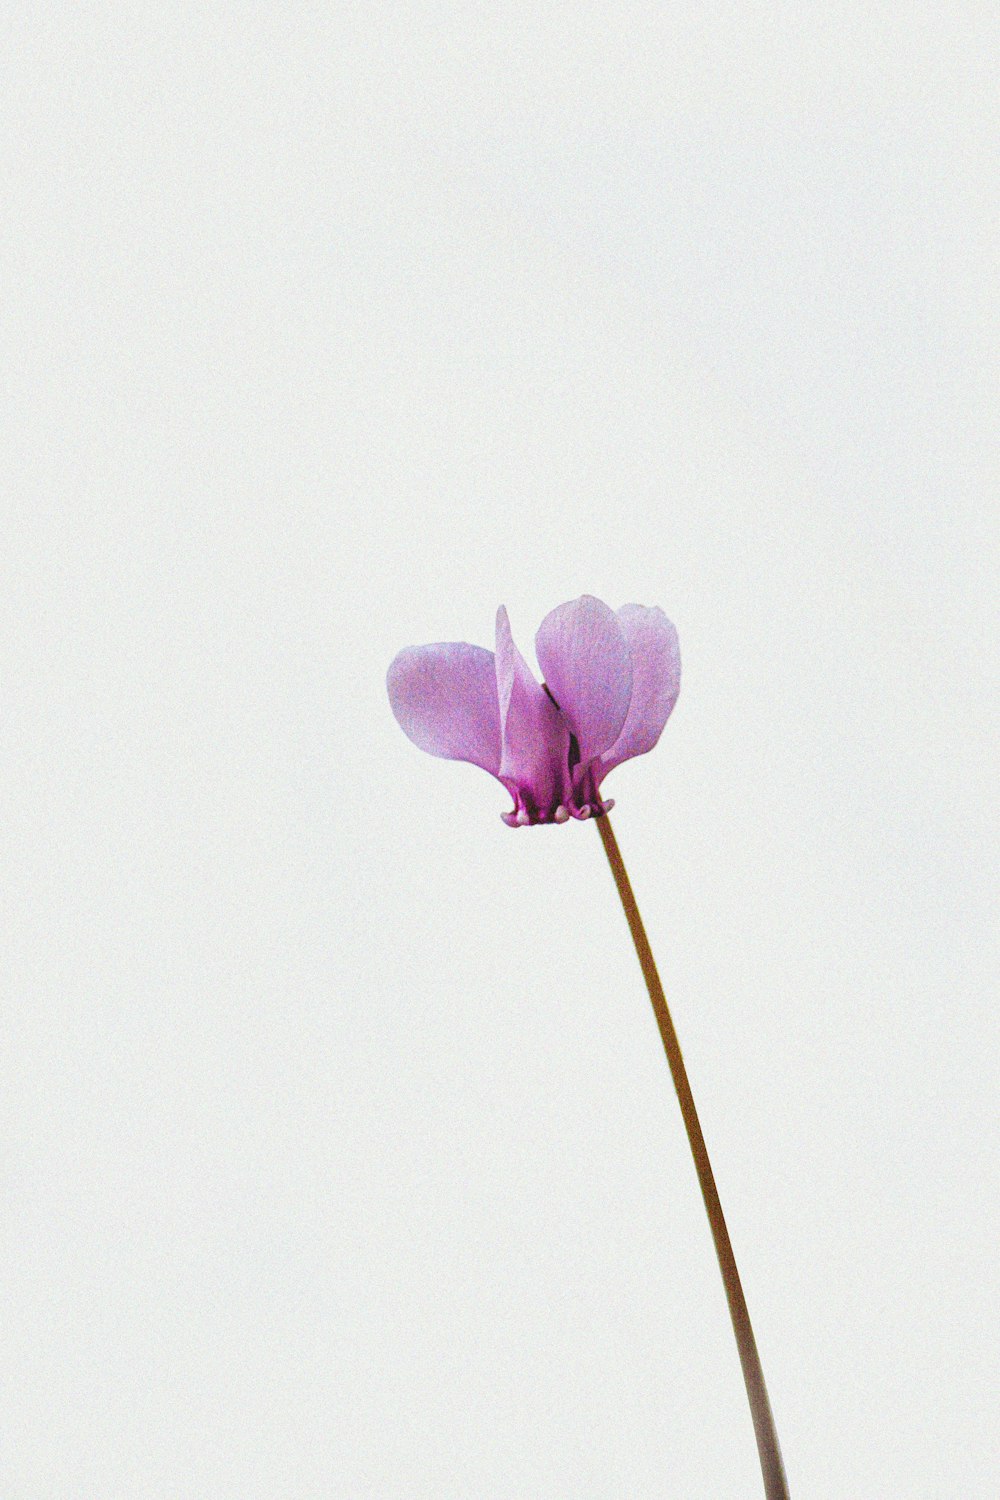 a single purple flower with a white background